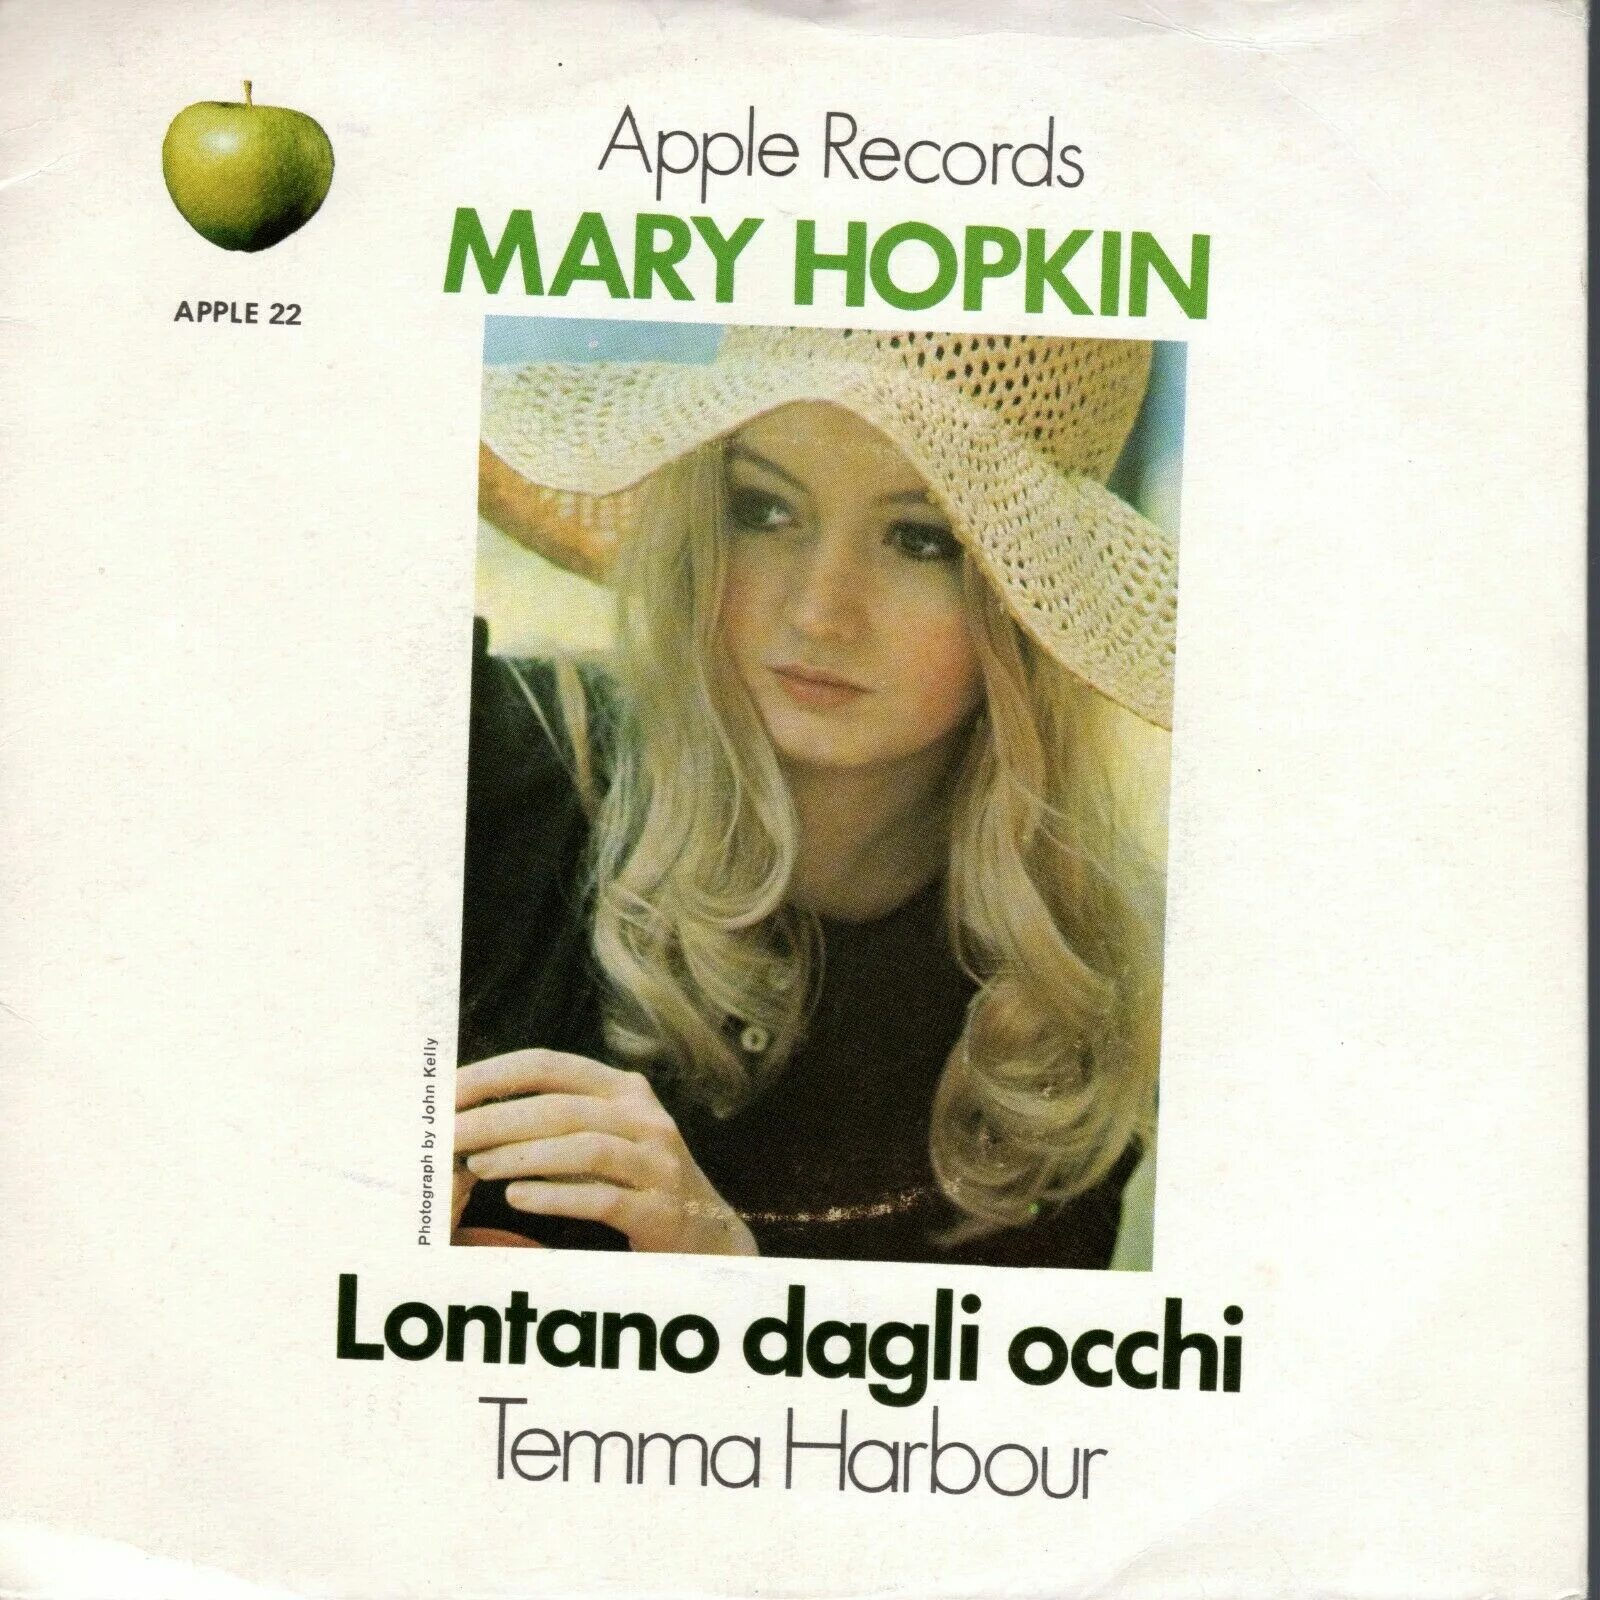 Mary Hopkin. Mary Hopkin фото. Mary Hopkin temma Harbour. Mary apple